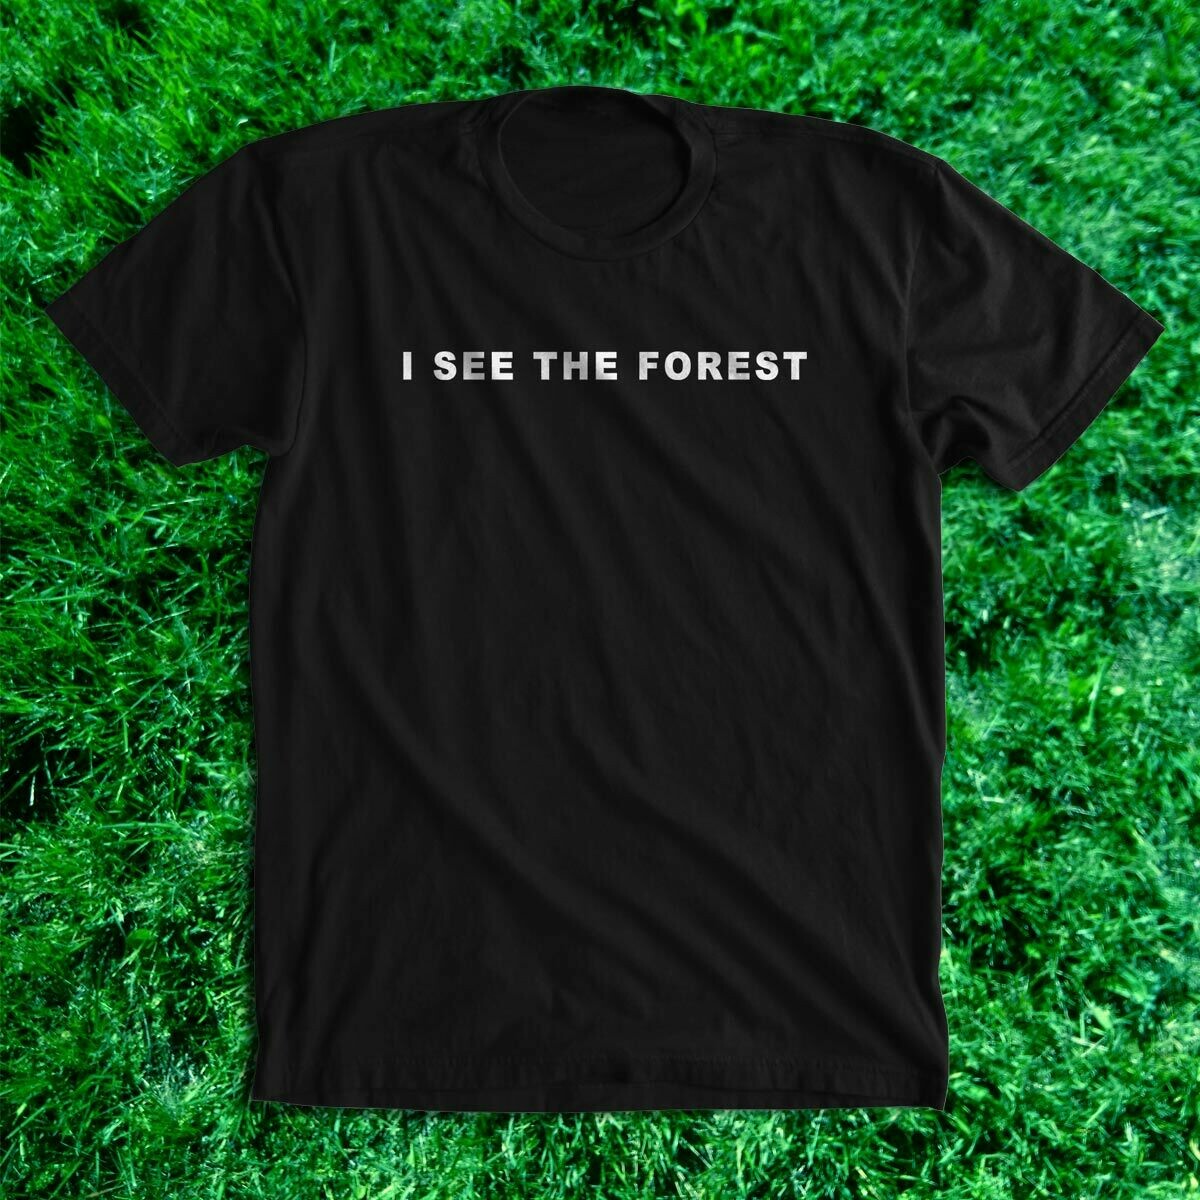 I SEE THE FOREST shirt